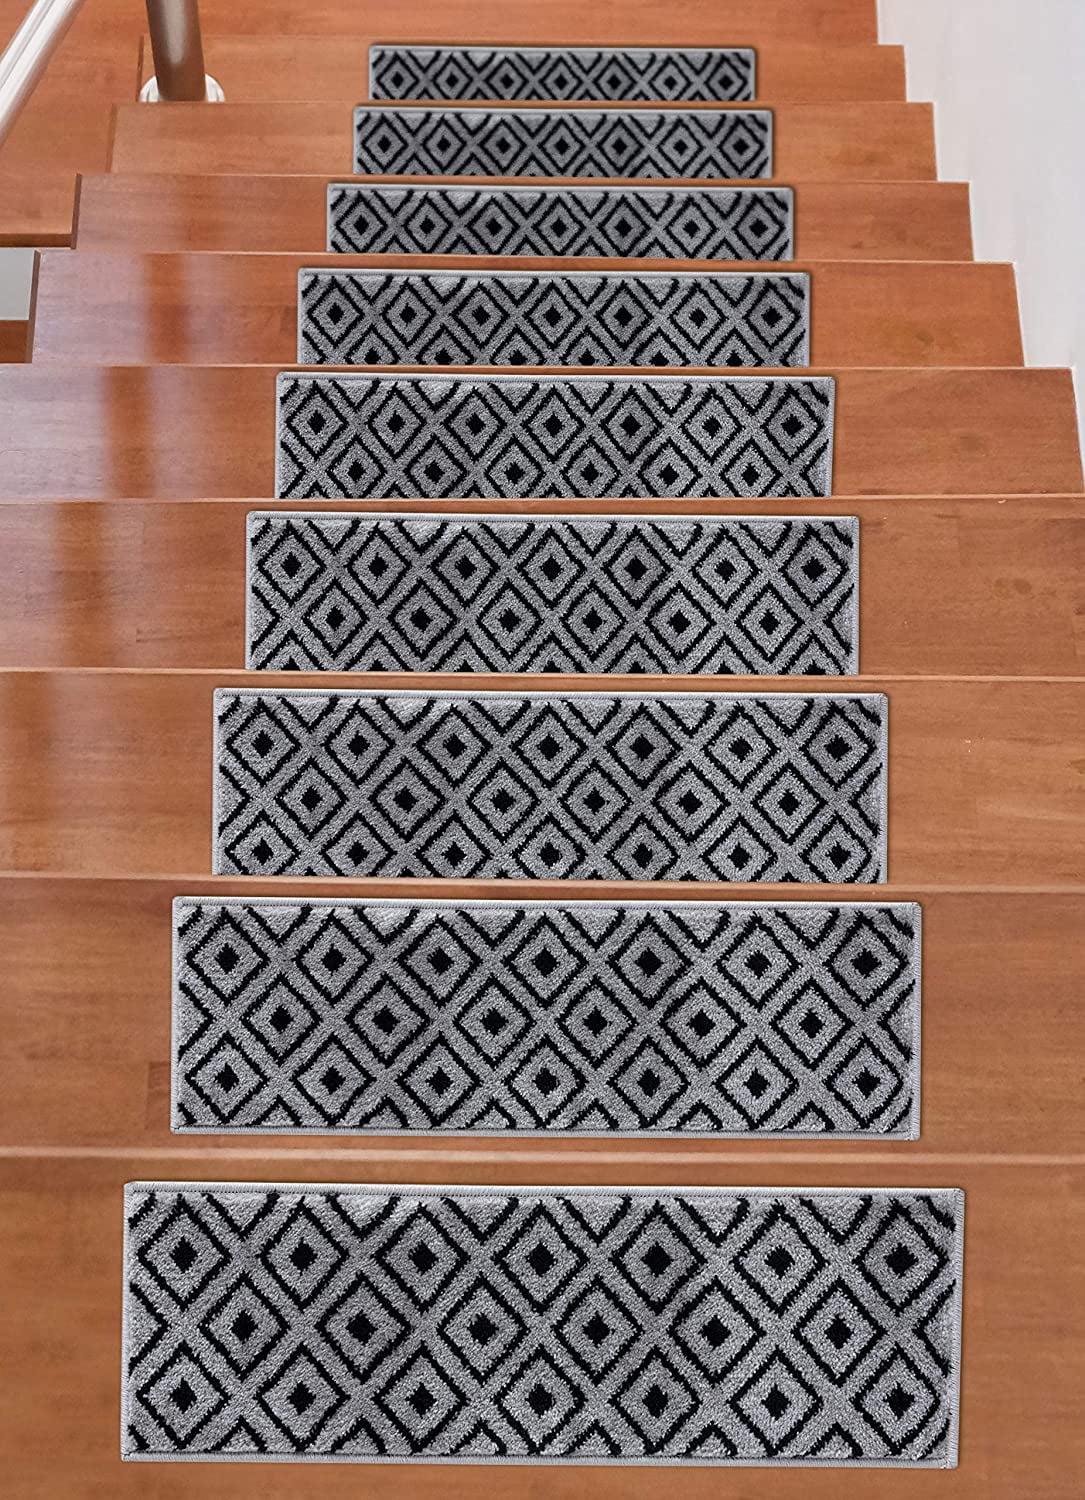 Details about   Set of 13 Rug Carpet Stair Treads Non Slip Skid Resistant Washable Mat USA 